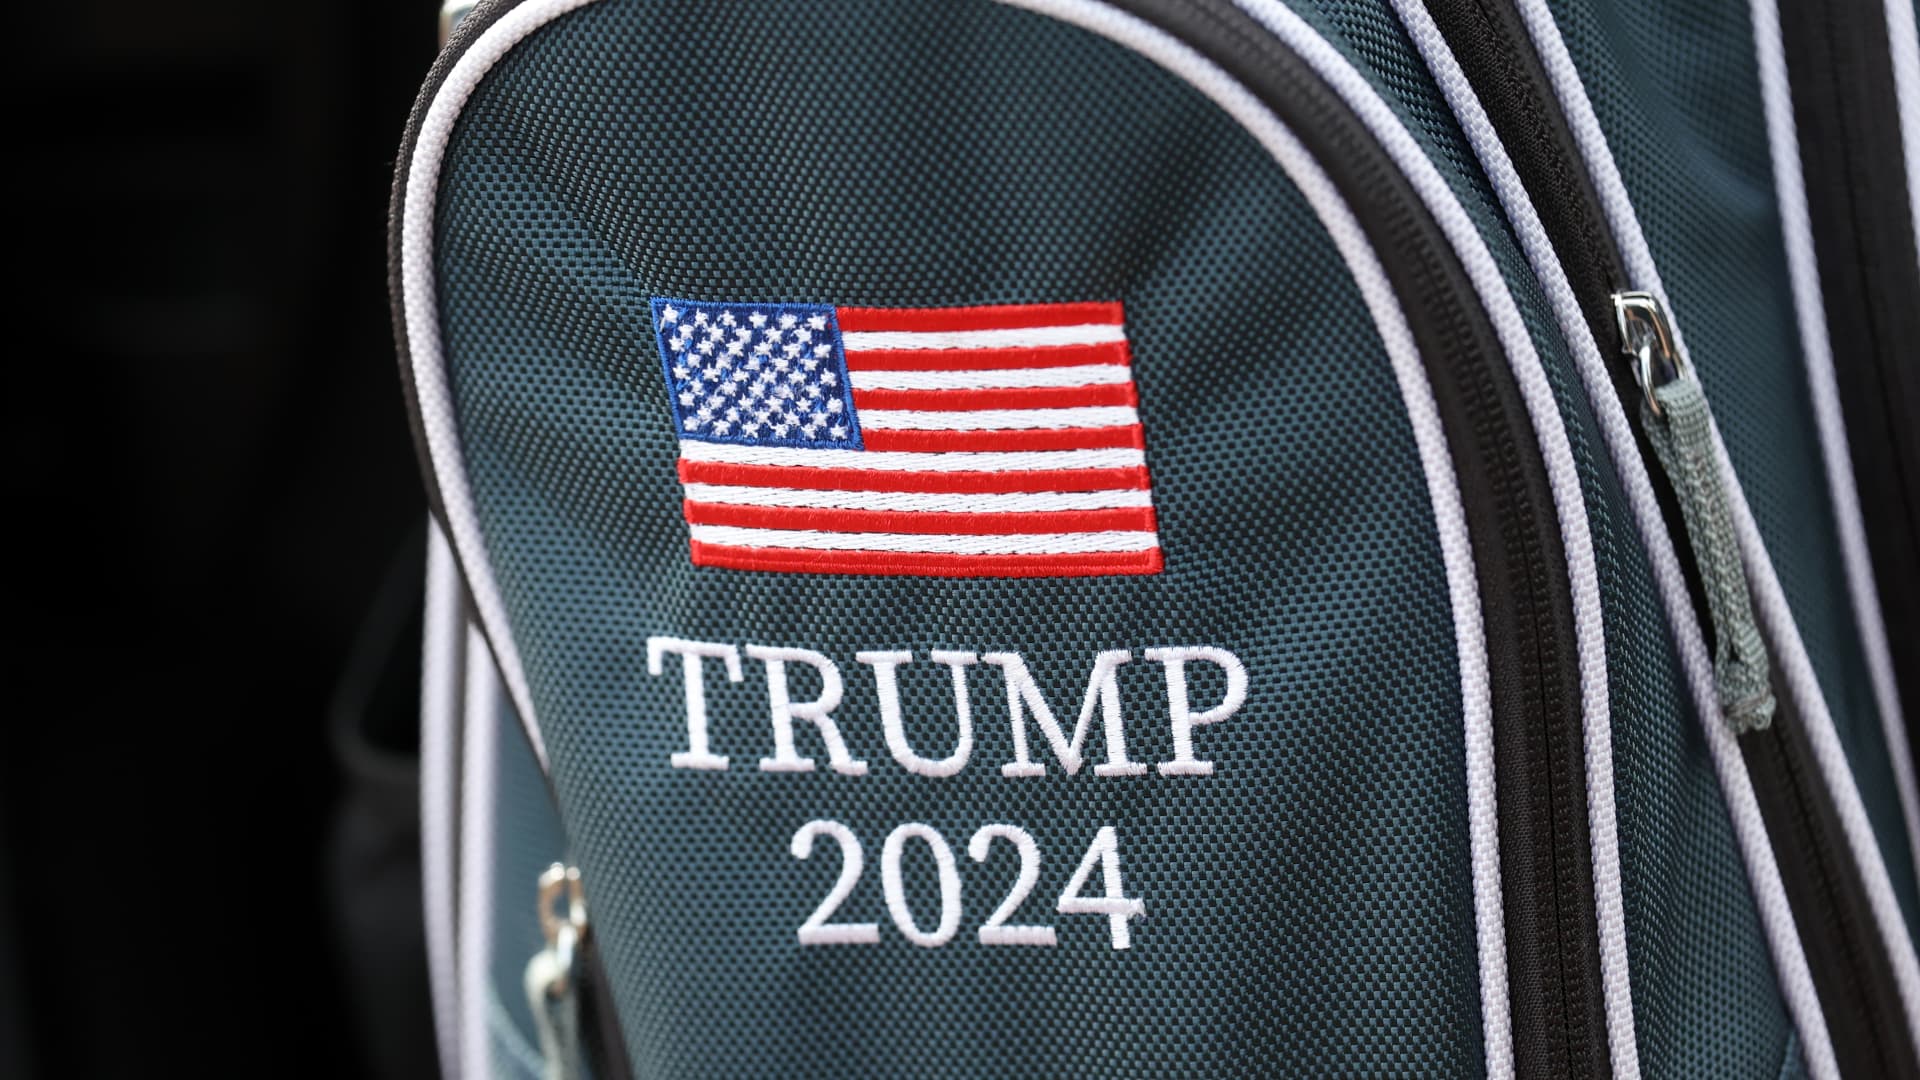 Trump in 2024: Eric Trump teases dad's third election run with golf bag at Saudi-backed tour event